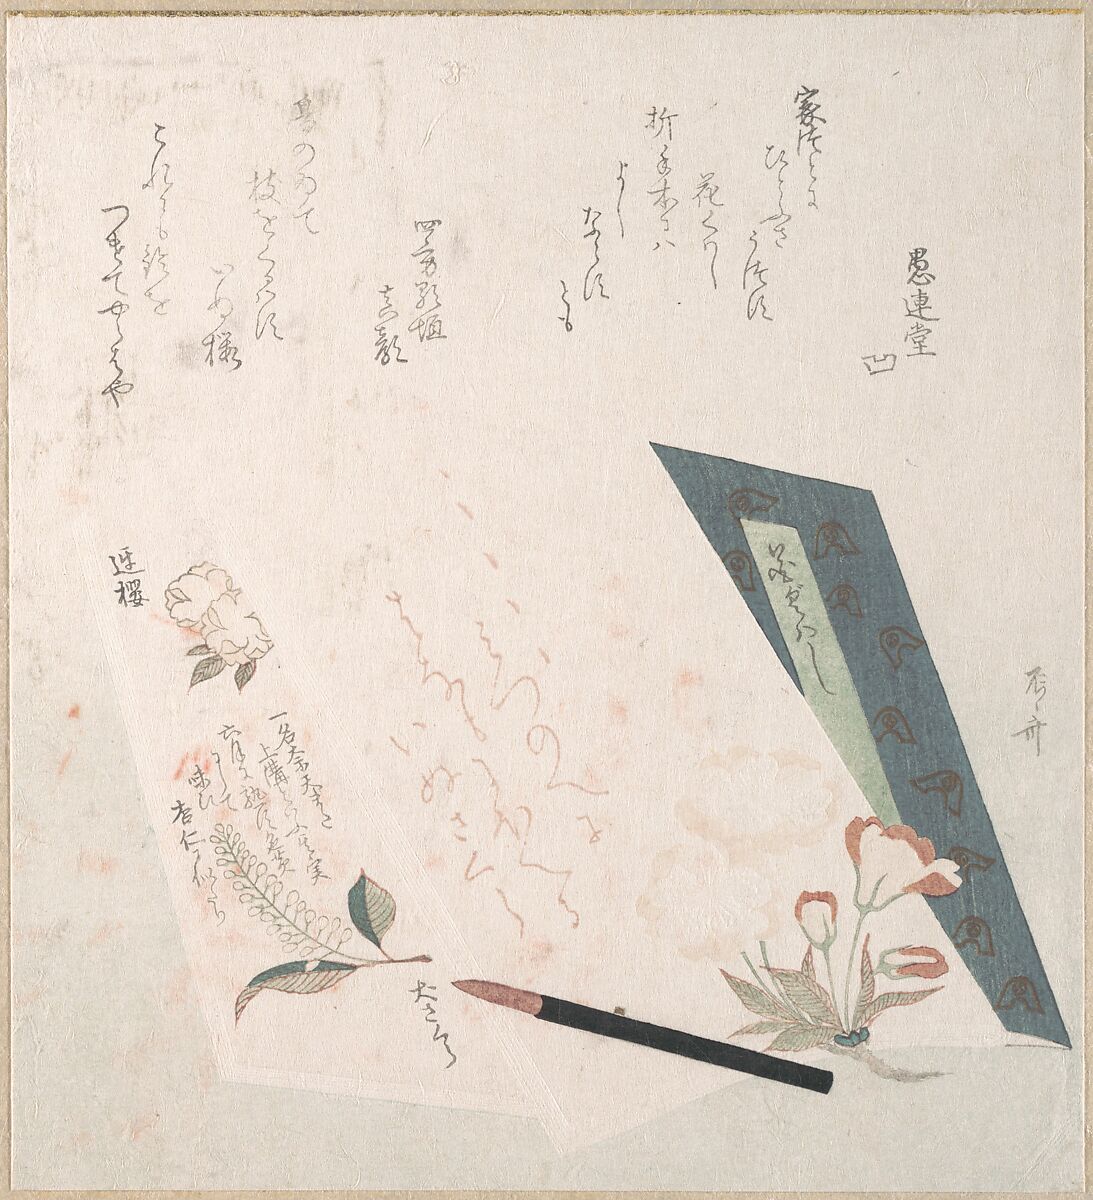 Books of Flowers and a Writing Brush, Ryūryūkyo Shinsai (Japanese, active ca. 1799–1823), Woodblock print (surimono); ink and color on paper, Japan 